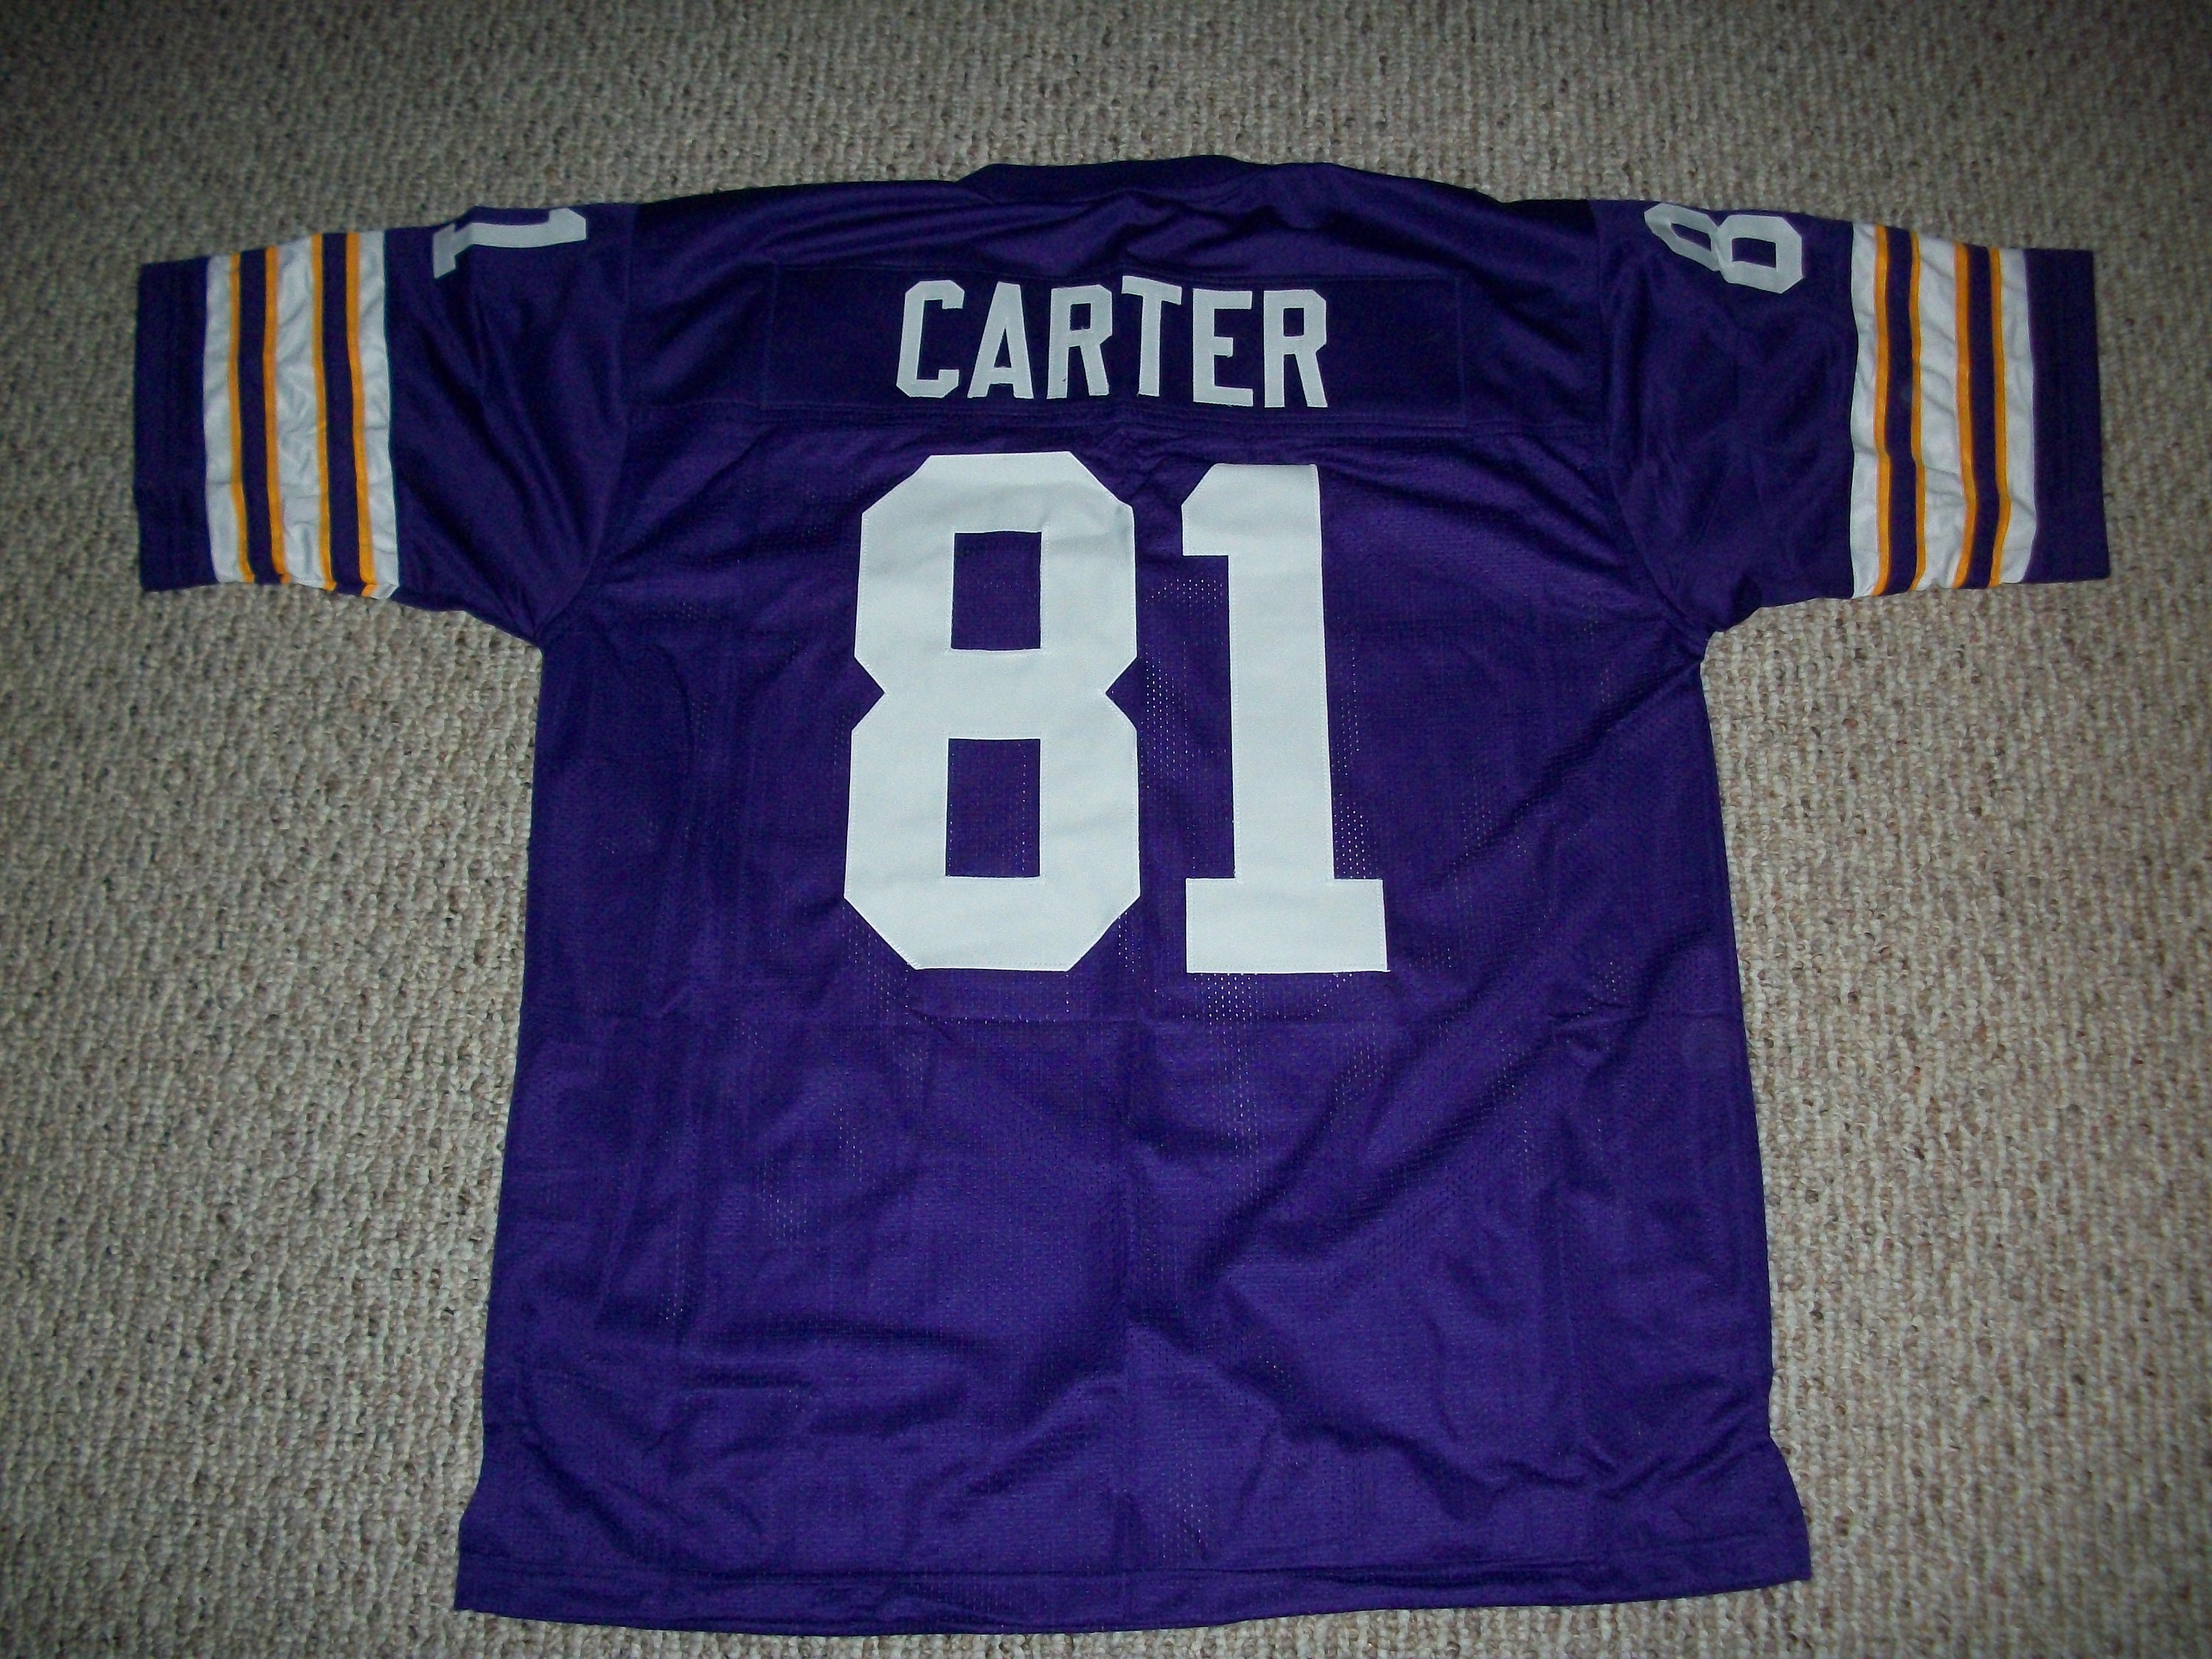 O'Donnell Carter replica jersey